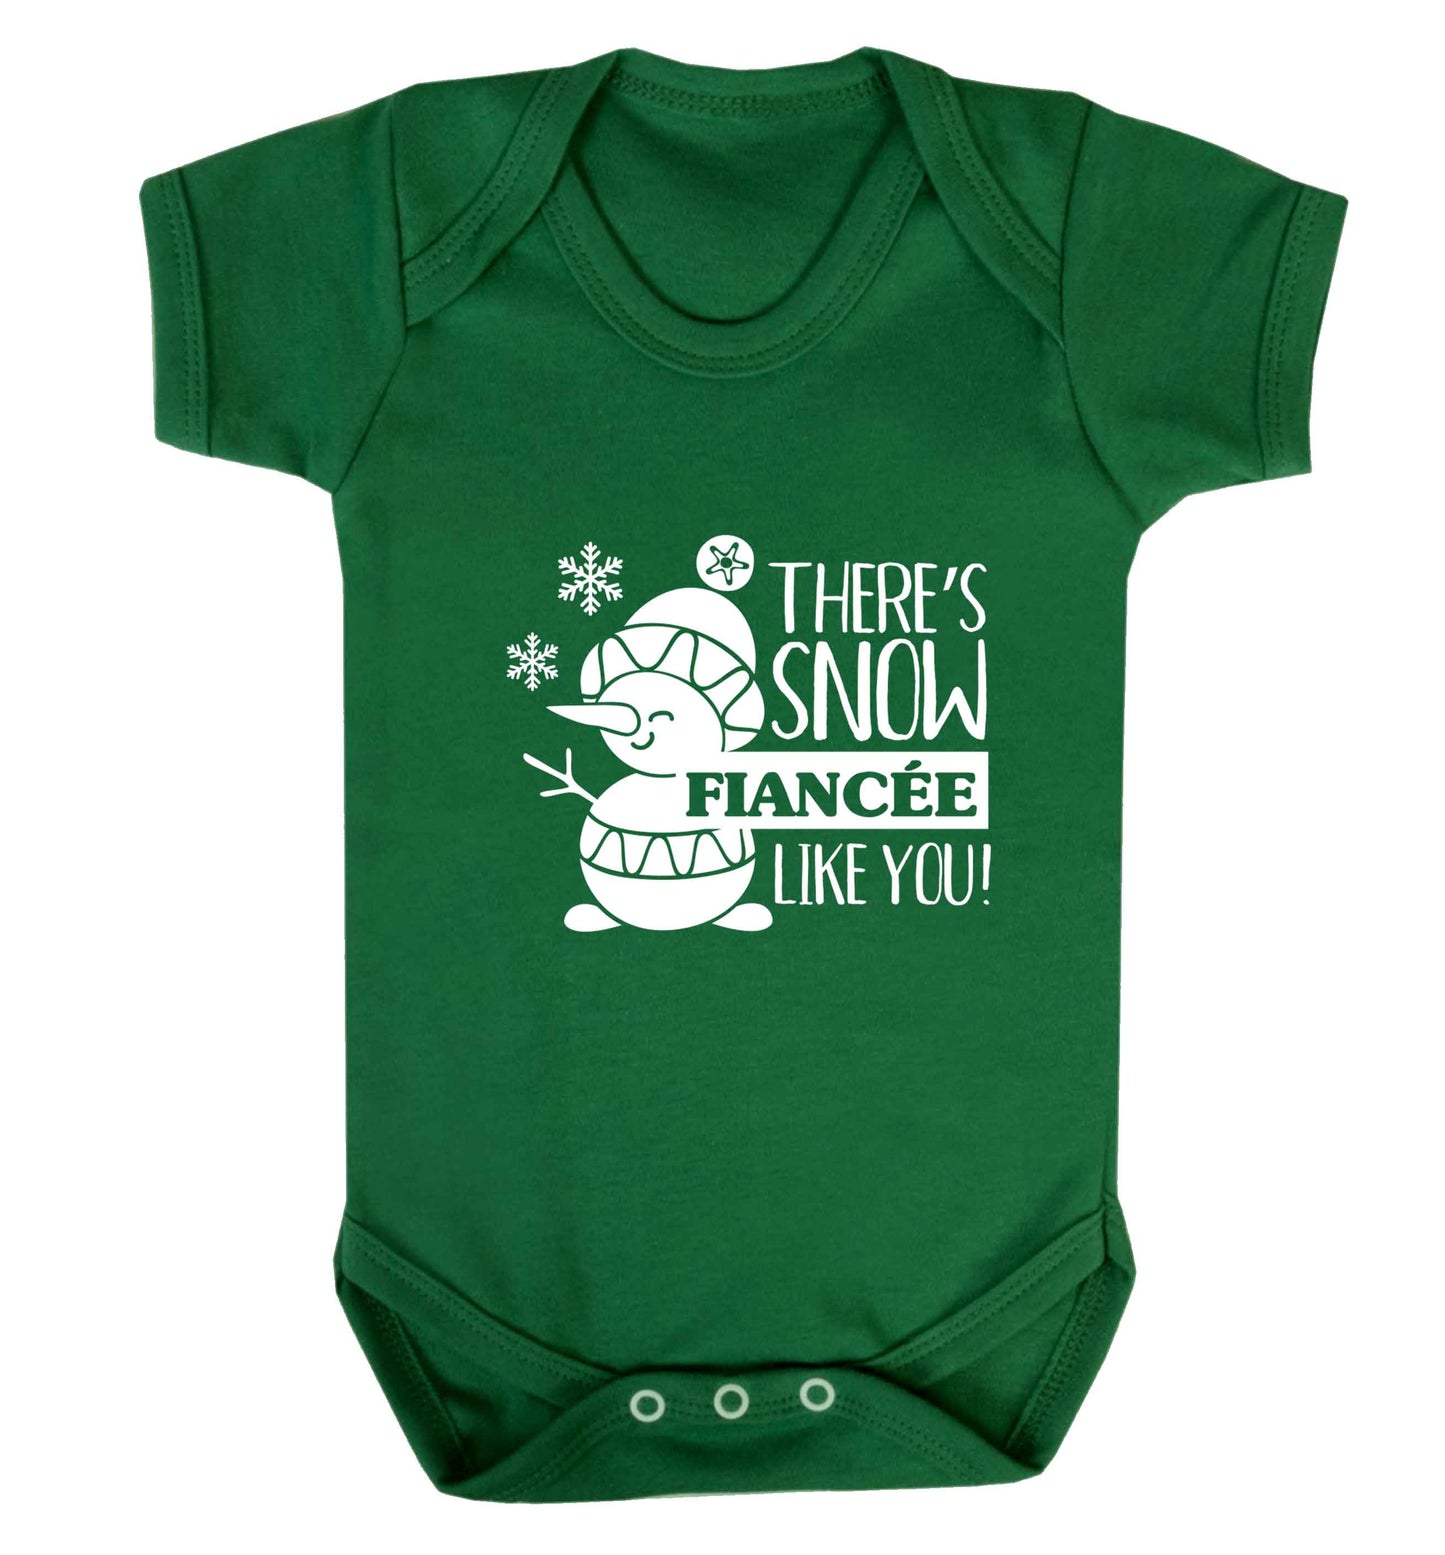 There's snow fiancee like you baby vest green 18-24 months